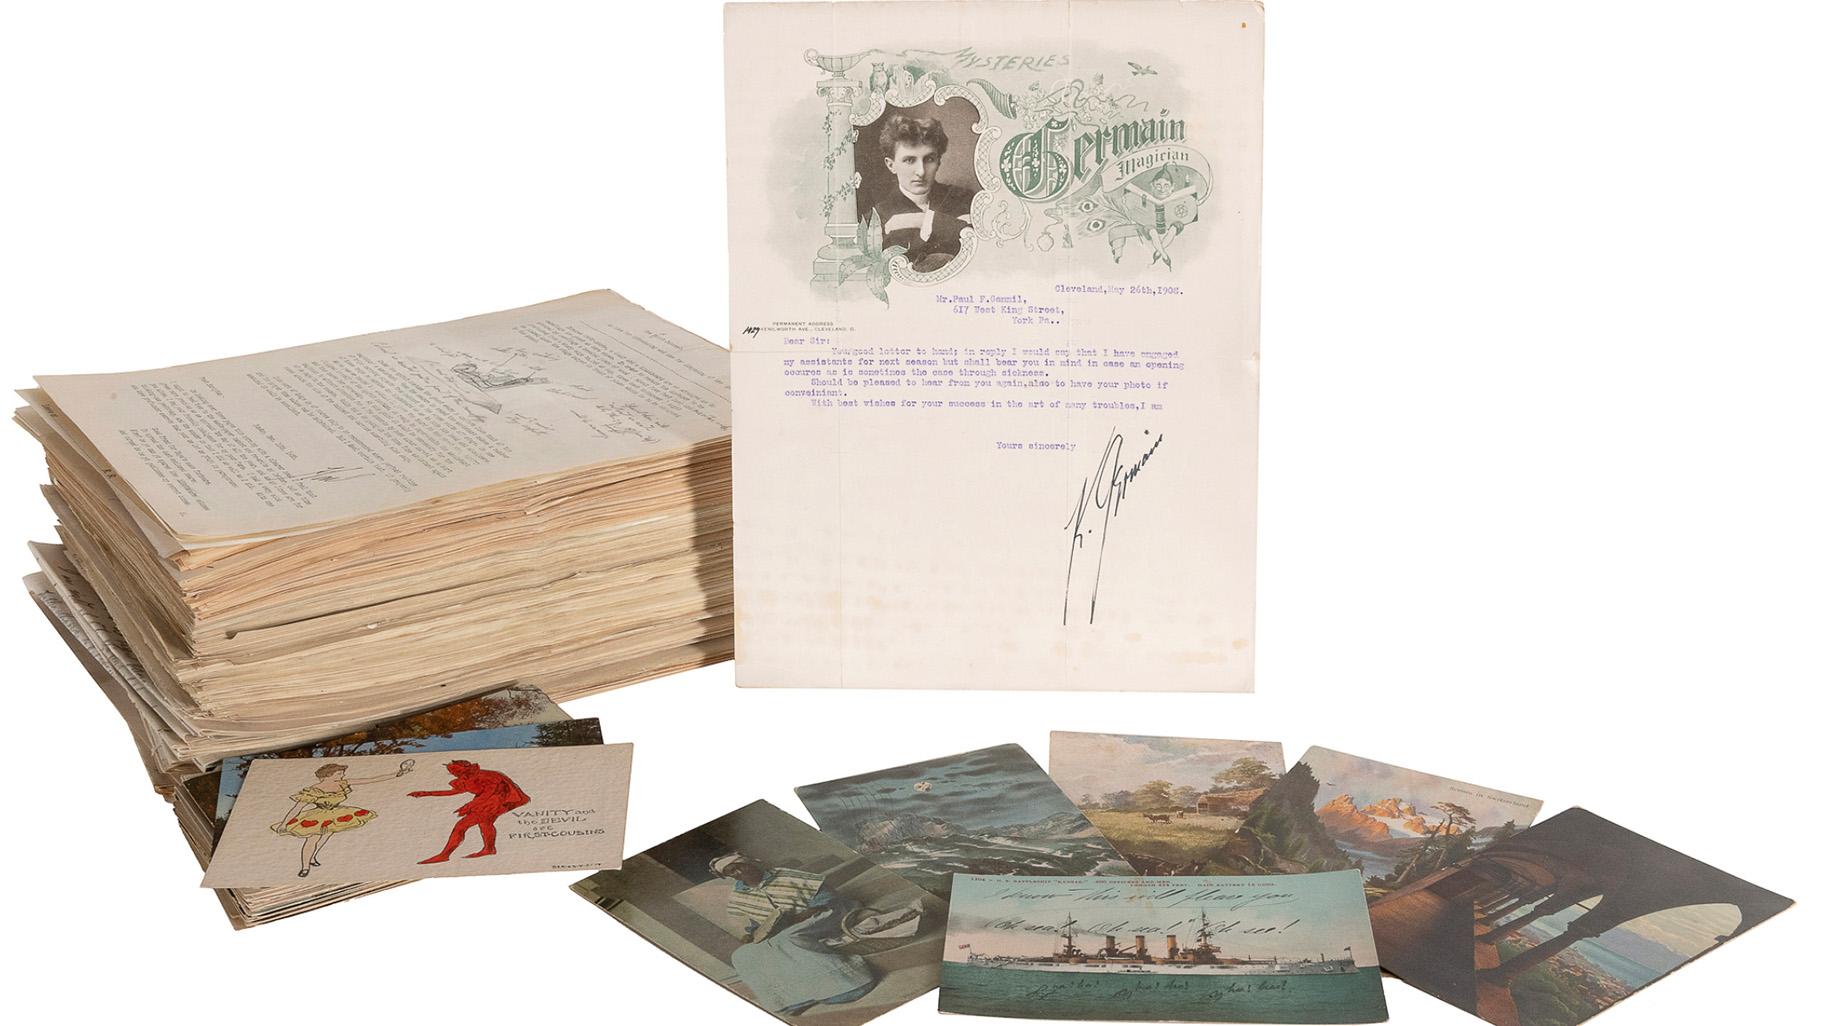 Lifelong correspondence from magician Germain the Wizard that spills trade secrets is set to be auctioned off. (Credit: Potter & Potter Auctions)